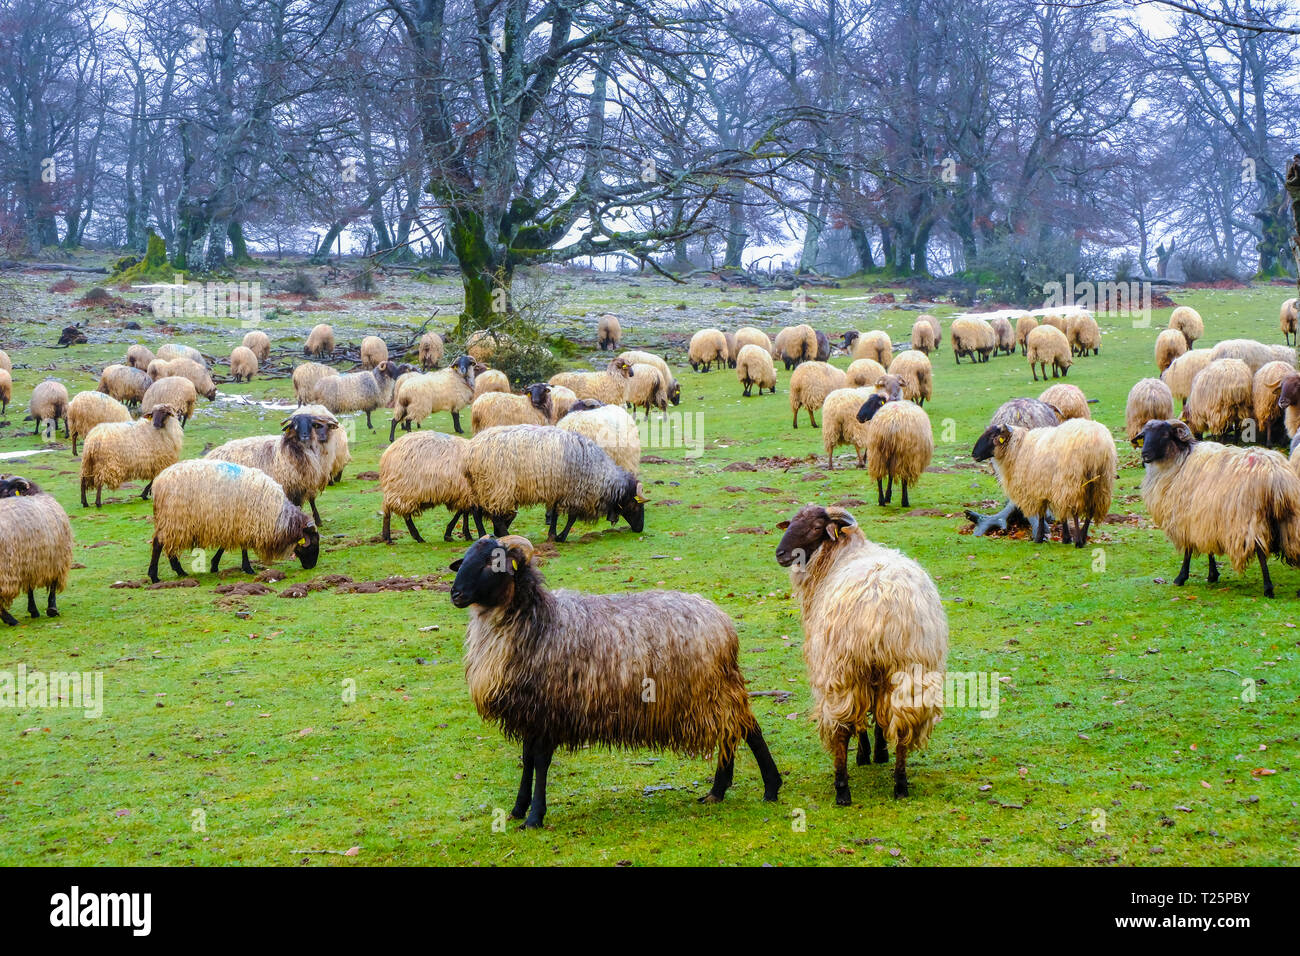 Flock of sheep in a grassland. Stock Photo